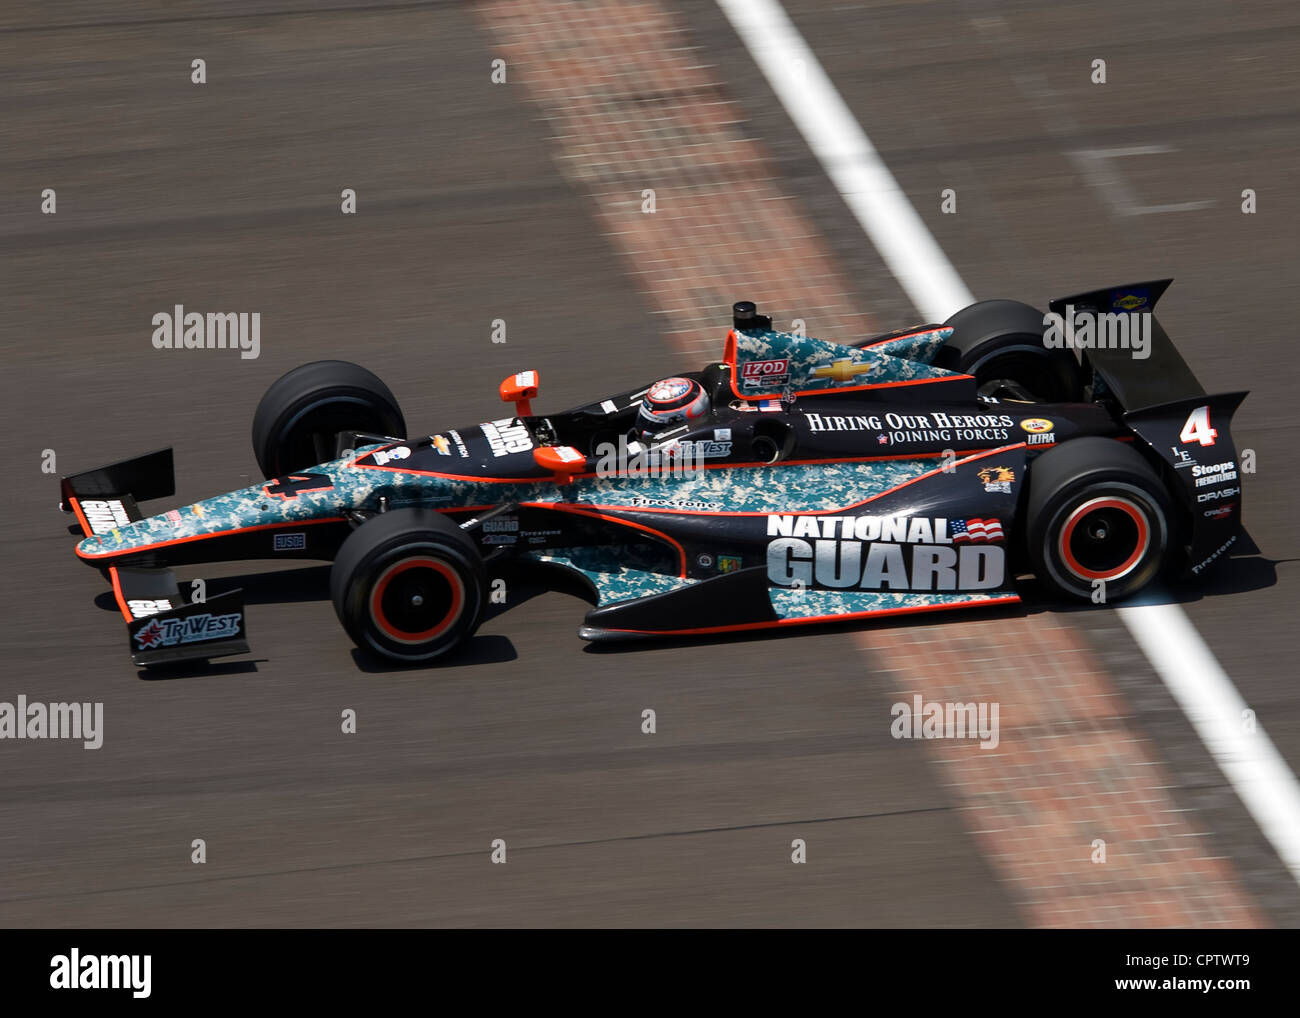 National Guard Sponsored #4 IndyCar machine Panther Racing Driver JR Hildebrand speeds past the “Yard of Bricks” finish line at Indianapolis Motor Speedway finishing in 14th place at the 96th running of the Indy 500, Sunday, May 27, 2012. Stock Photo